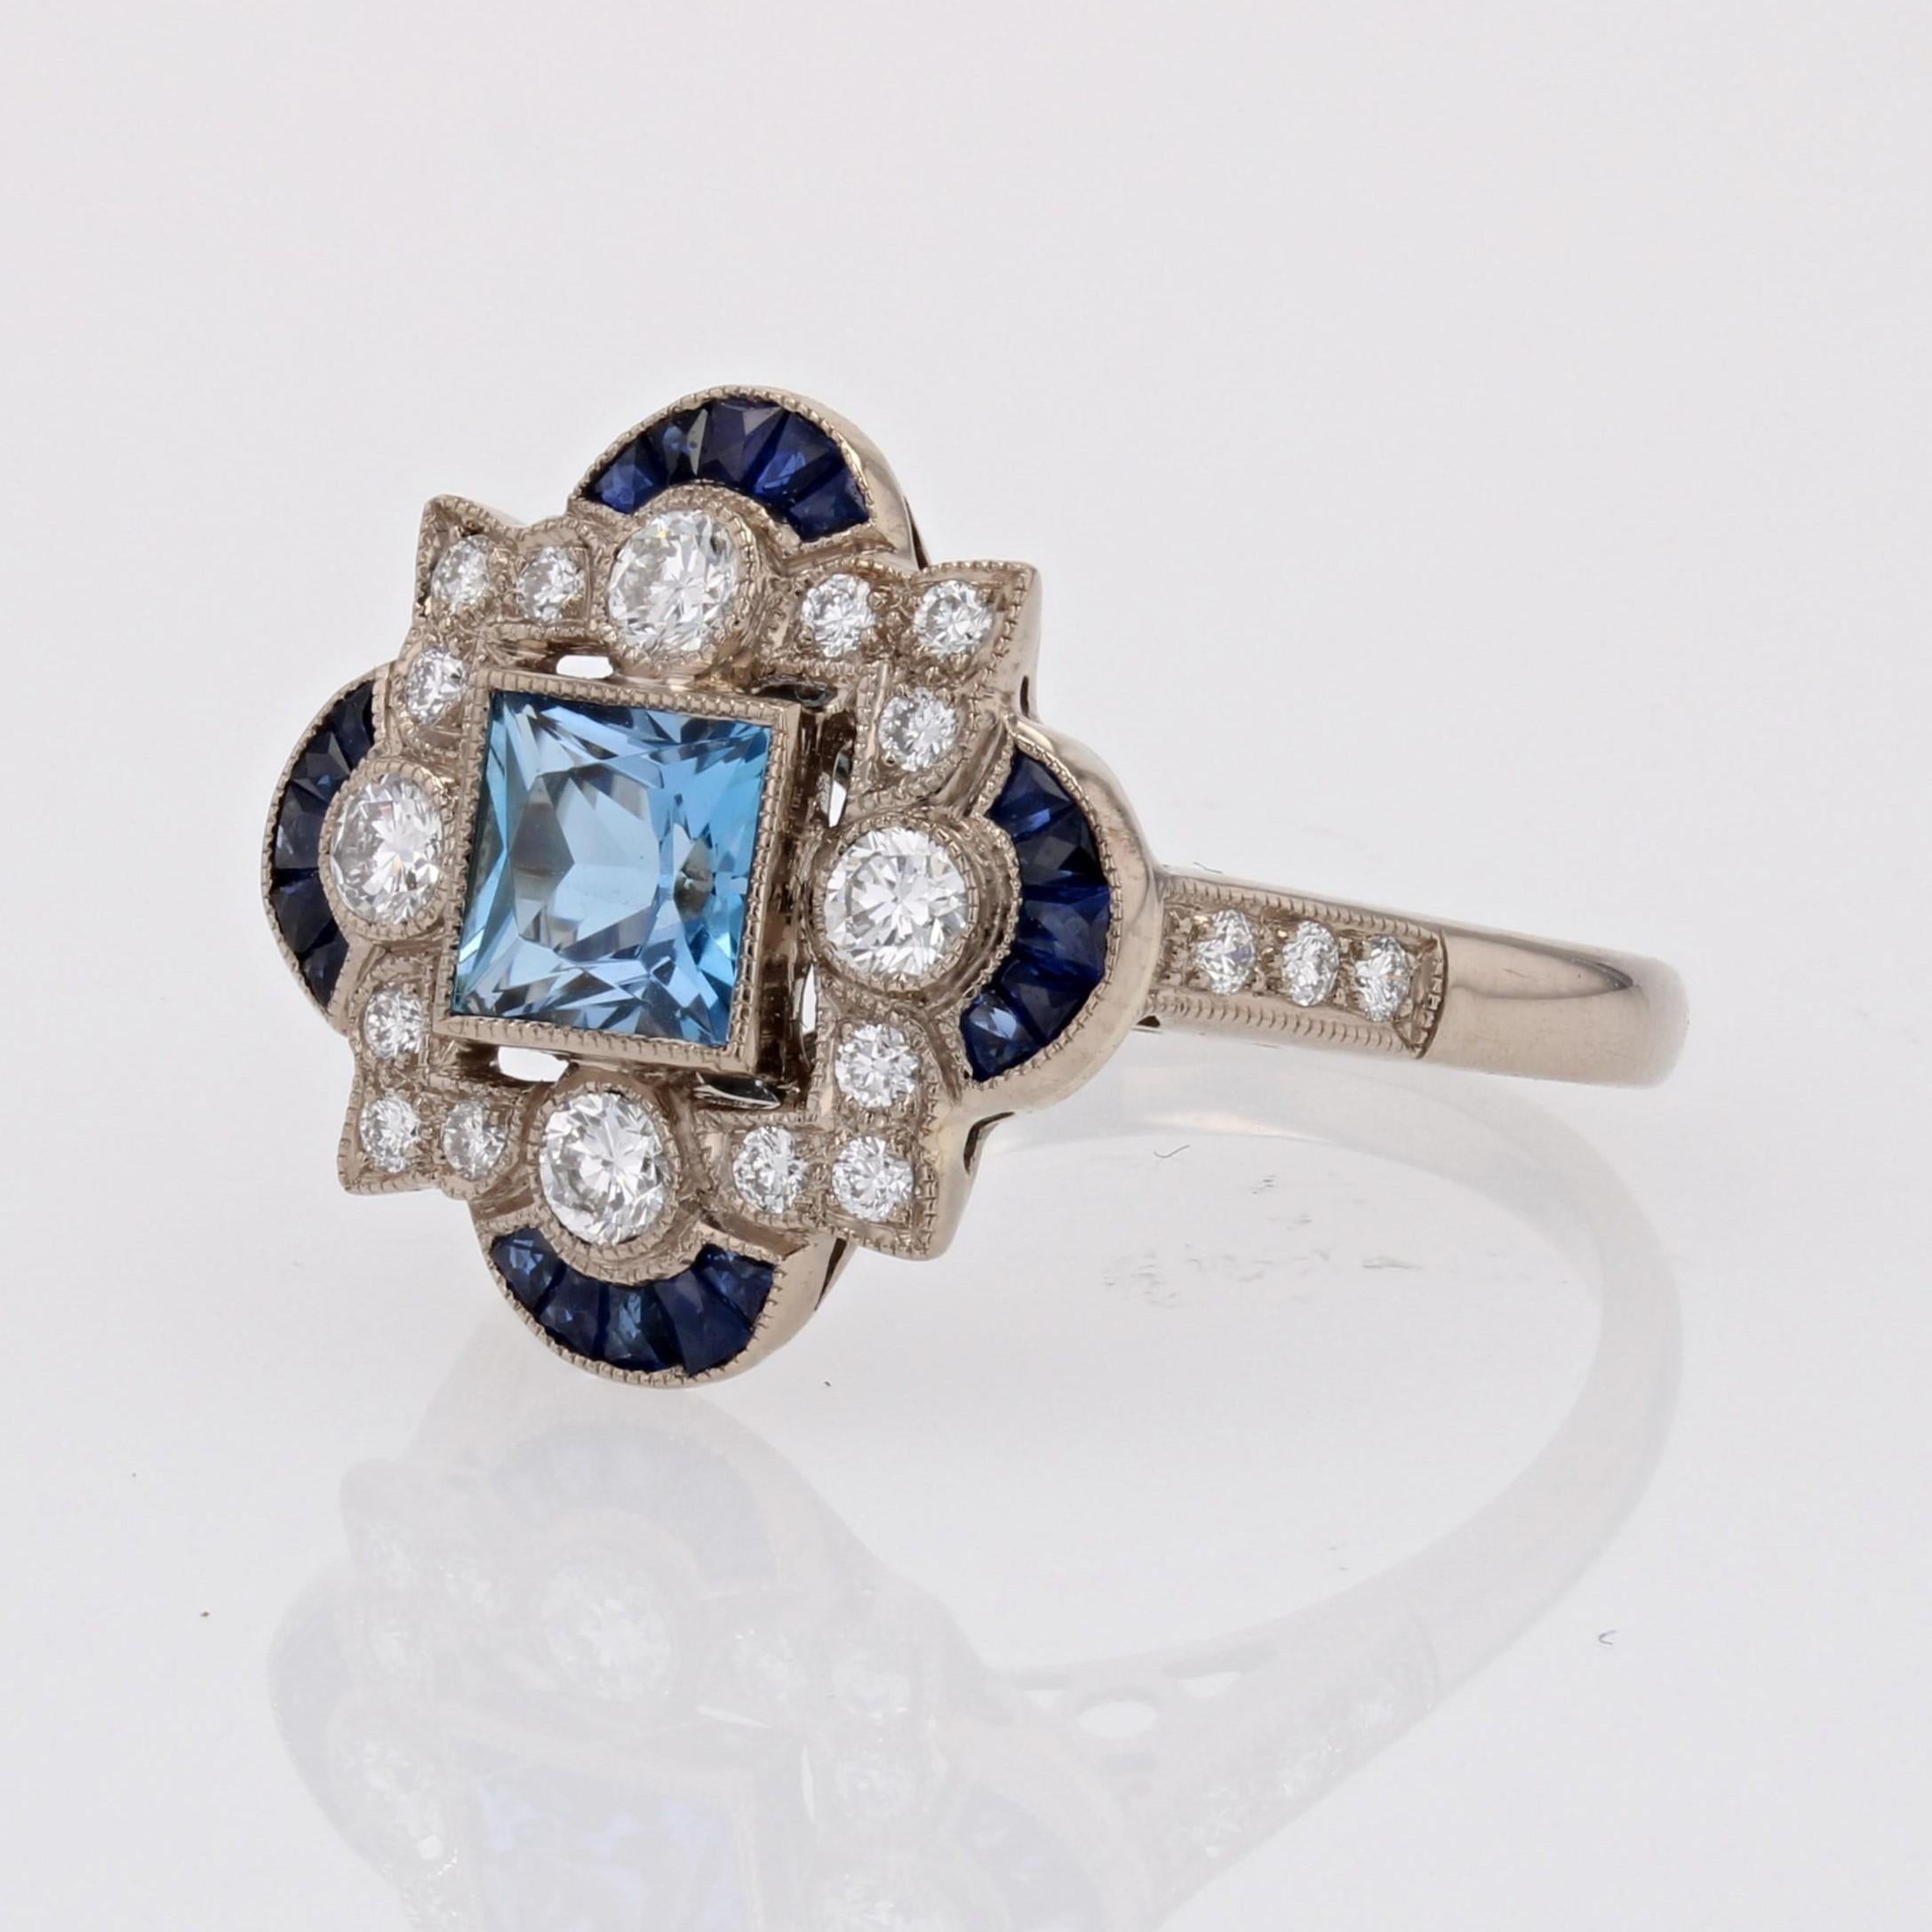 New Art Deco Style Aquamarine Calibrated Sapphires Diamonds 18K White Gold Ring For Sale 3